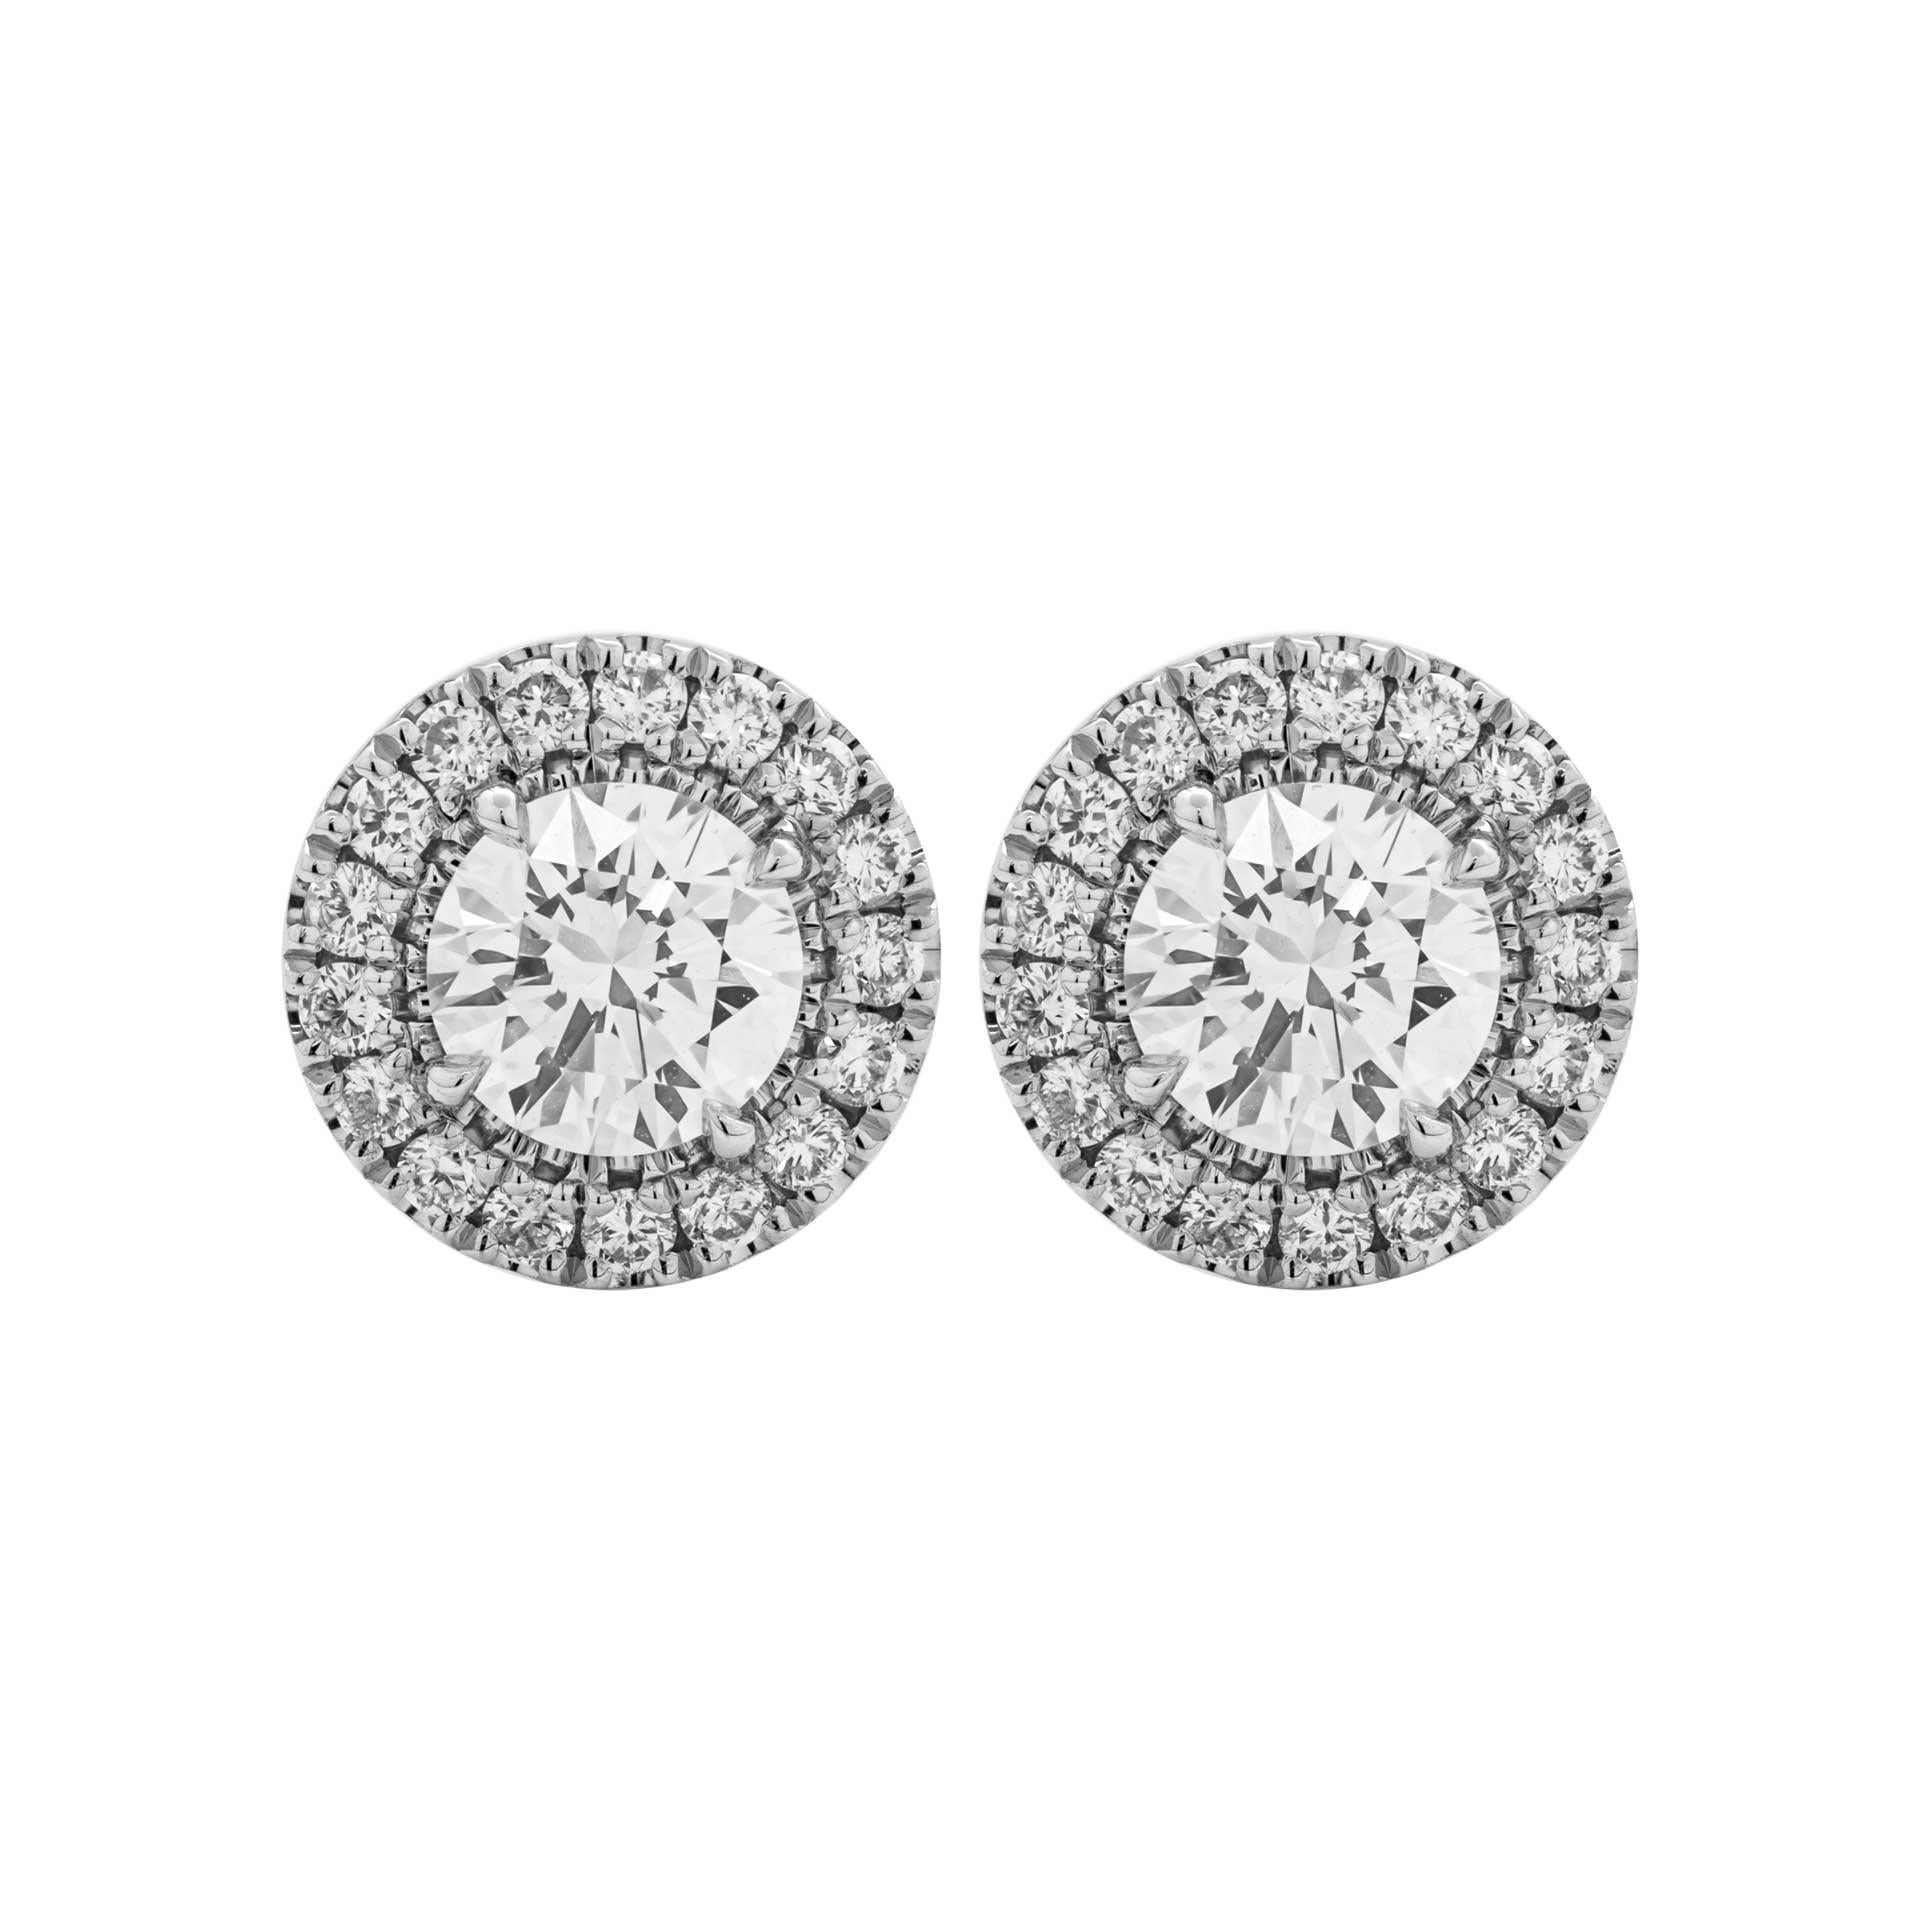 Classic design that is essential addition to any jewelry collection, a true staple!
Nice and delicate halo around center stone diamonds make stones appear larger, looks like a true 1 carat.
Each stone is 0.60ct and GIA certified:
0.60ct G VS1 Round